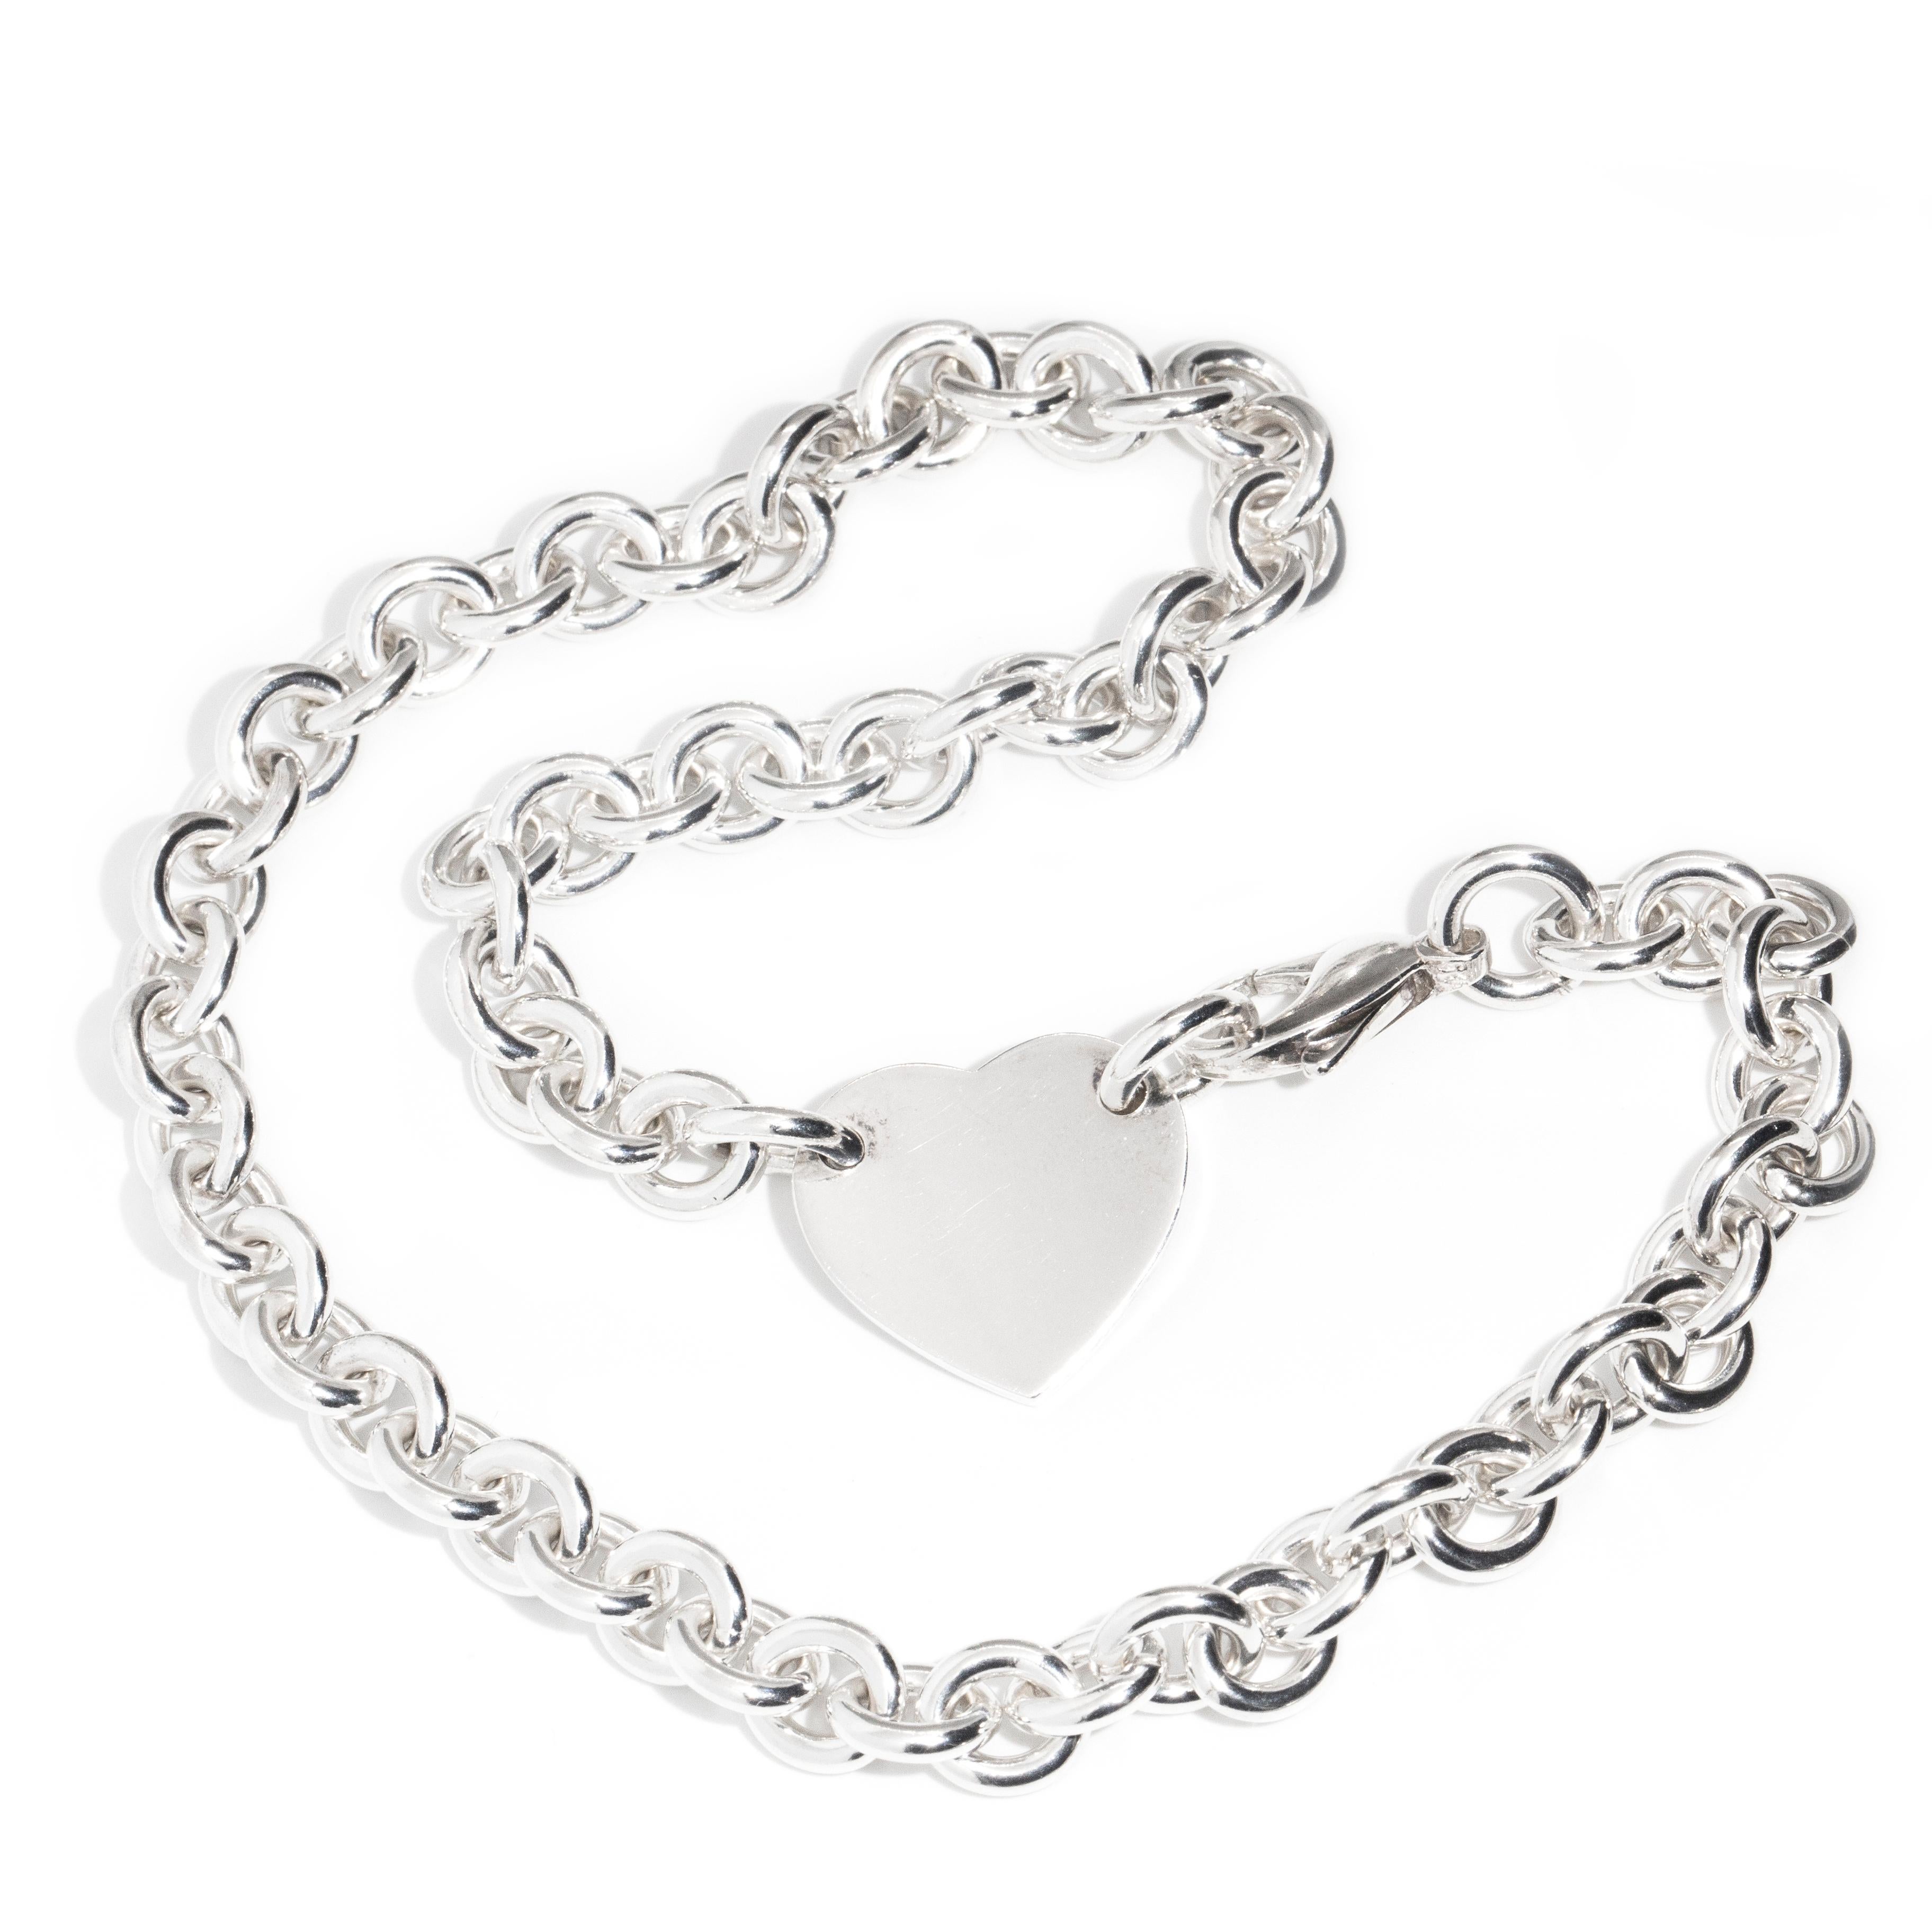 Tiffany & Co. Sterling Silver Chain Link Necklace & Hallmarked Heart Tag Pendant 4